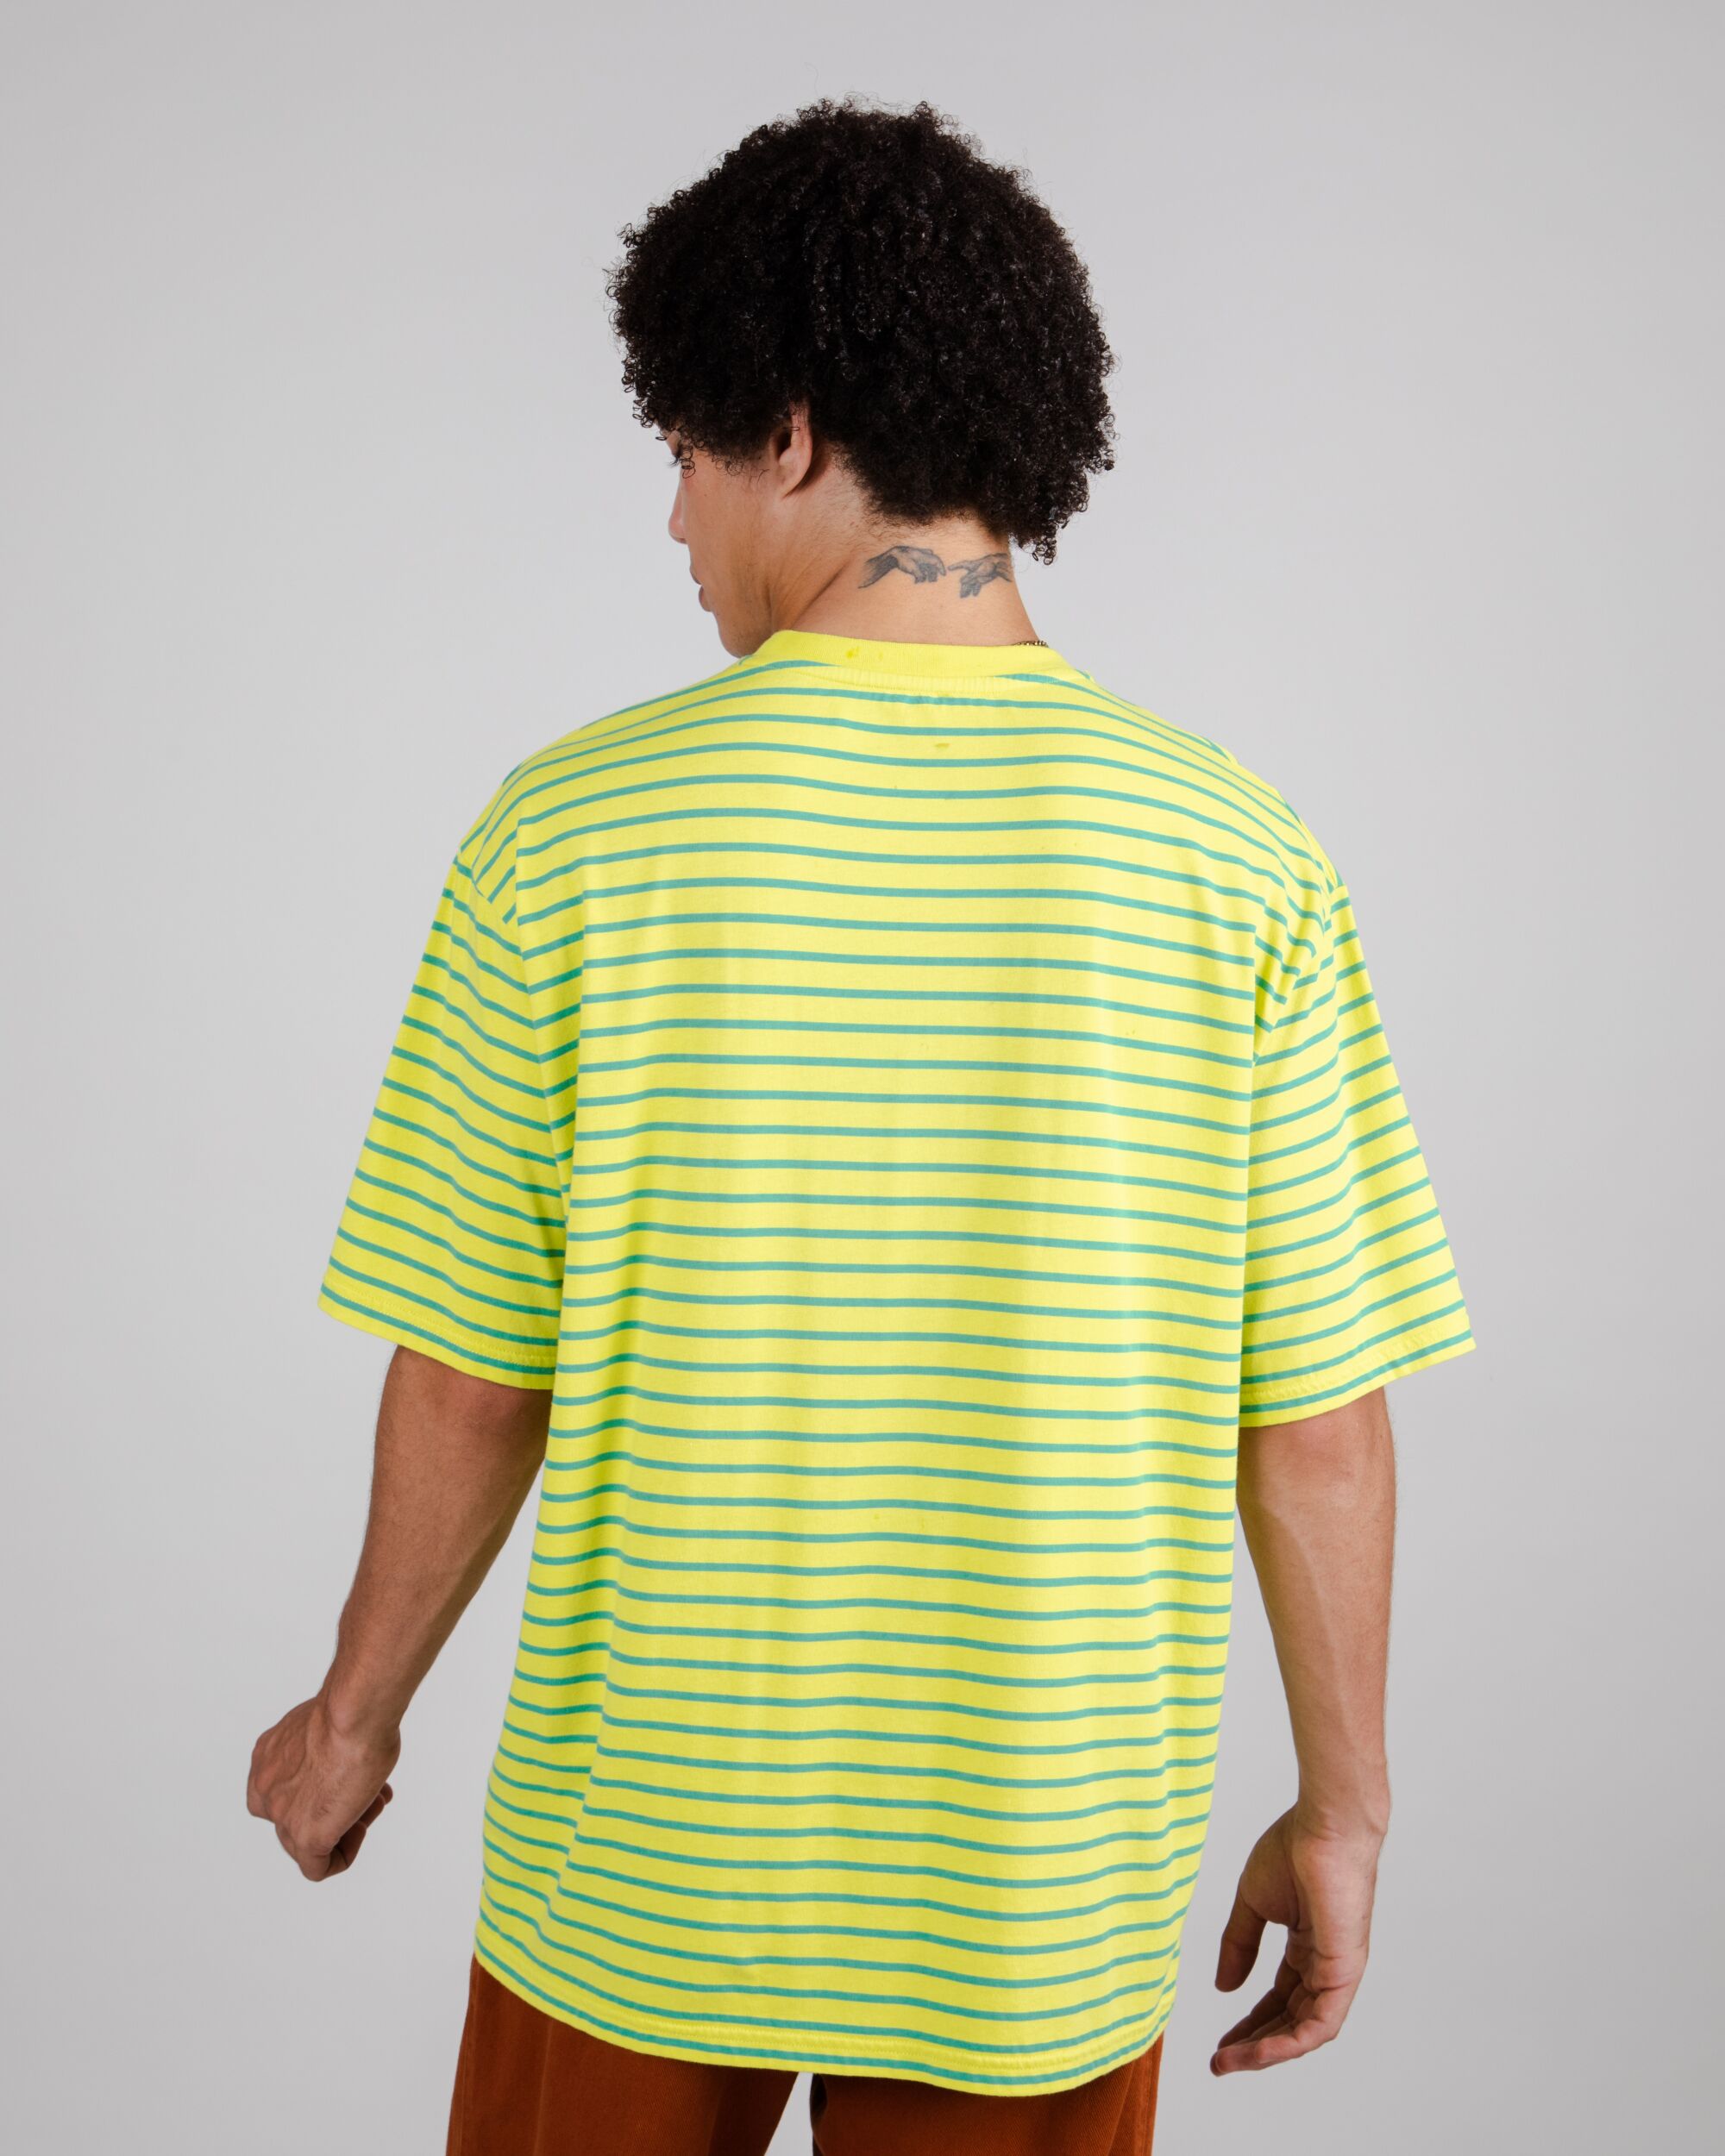 Oversize T-shirt Stripes in Lime made from organic cotton by Brava Fabrics